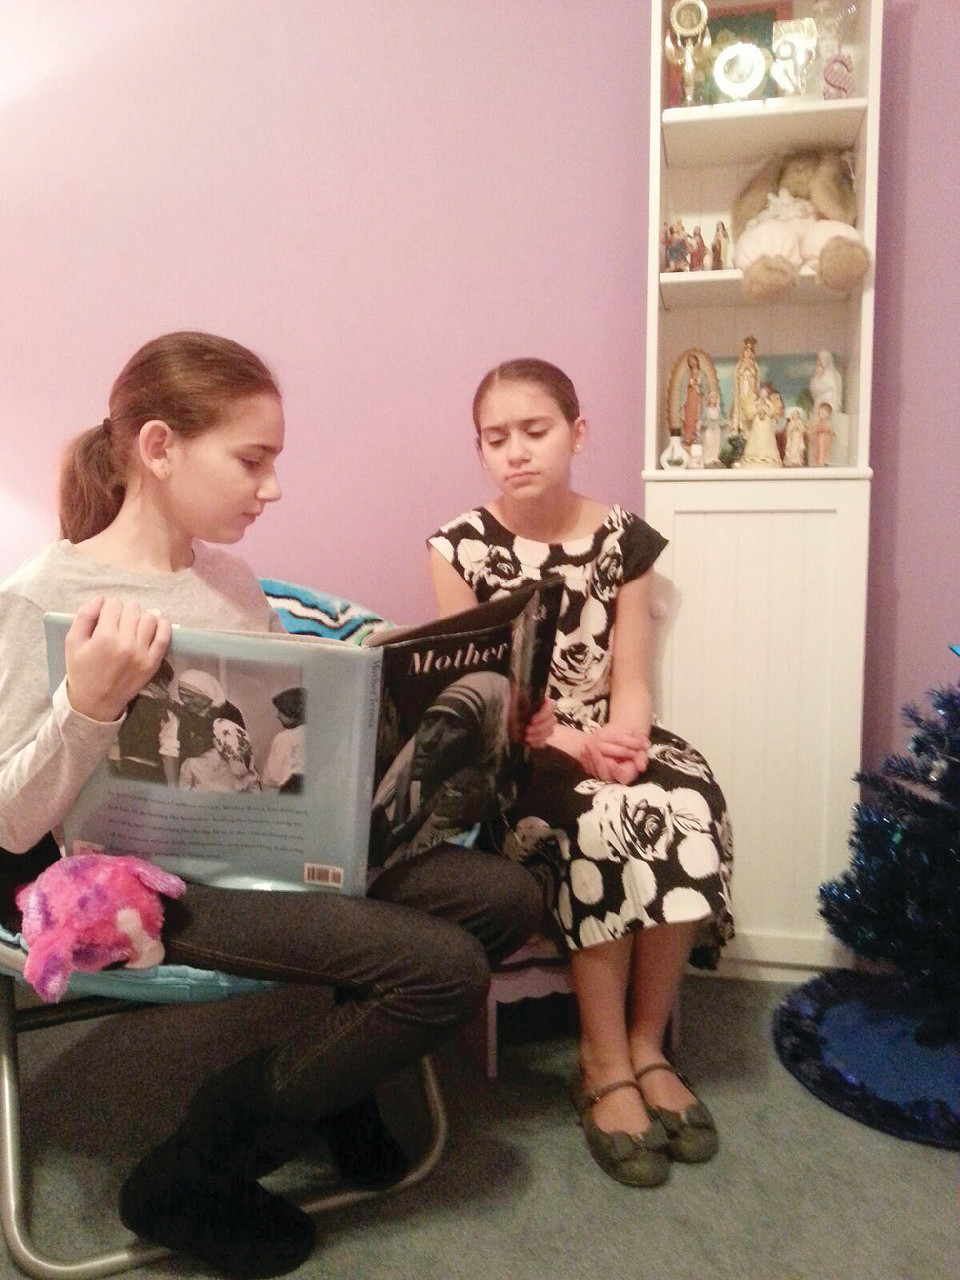 Sydney Khoury, now 13 and a seventh-grader at St. Philip School, reads one of her story books on the life of Mother Theresa with her younger sister Ava, 12, a student at St. Thomas.